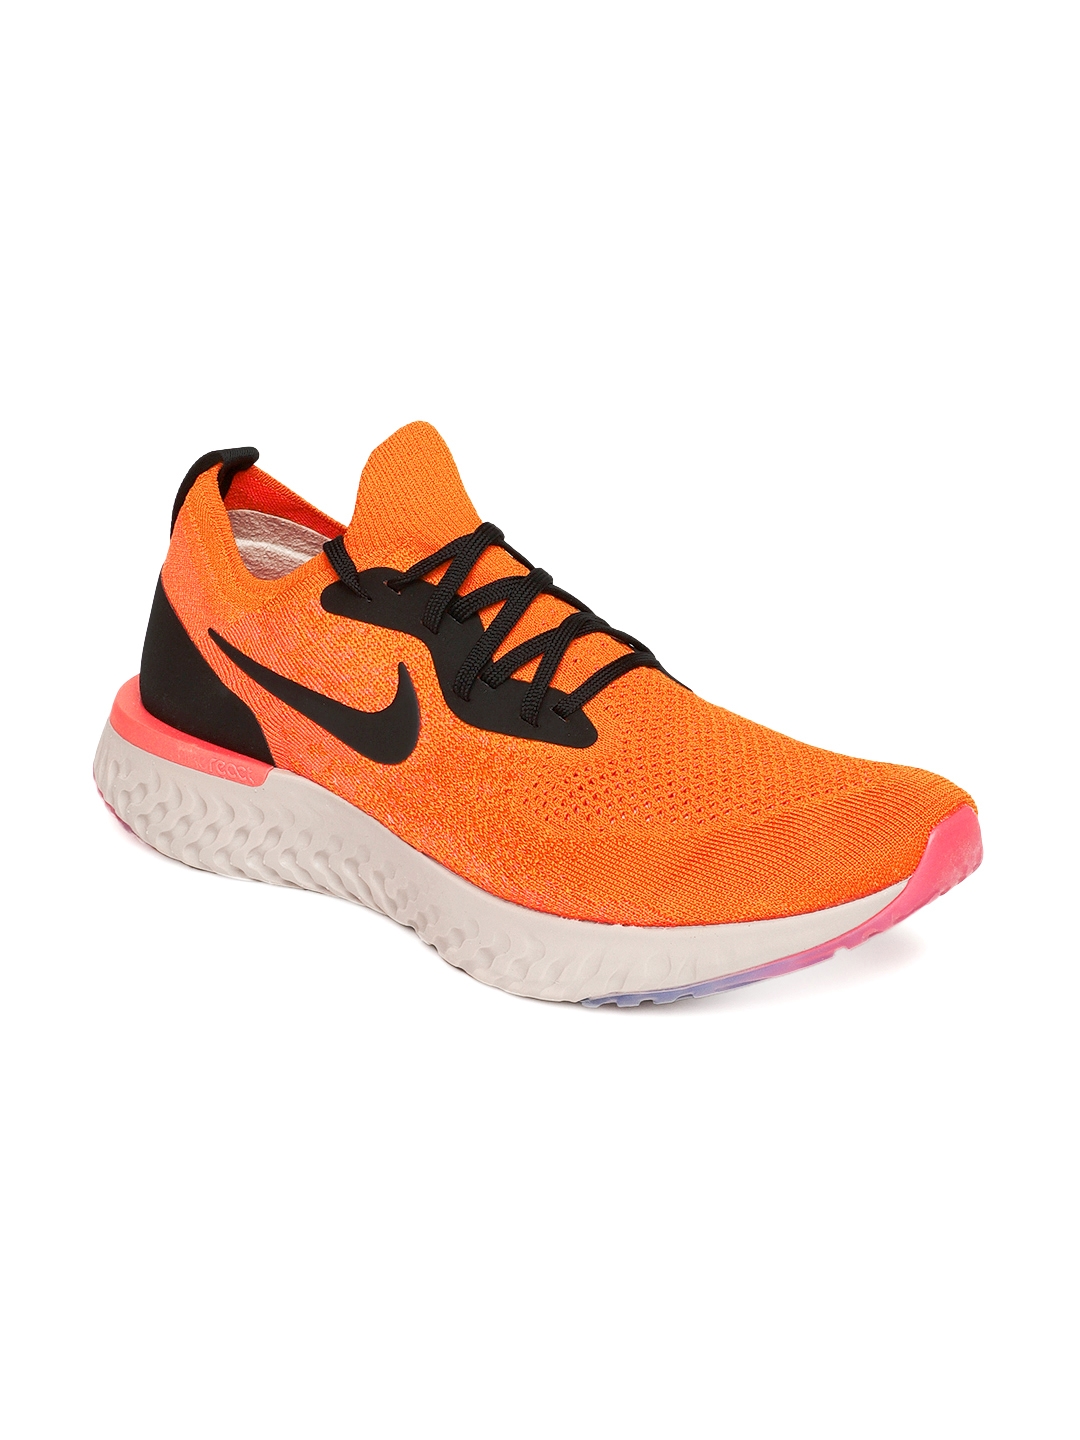 equilibrio capoc Correo aéreo Buy Nike Men Orange EPIC REACT FLYKNIT Running Shoes - Sports Shoes for Men  7487628 | Myntra